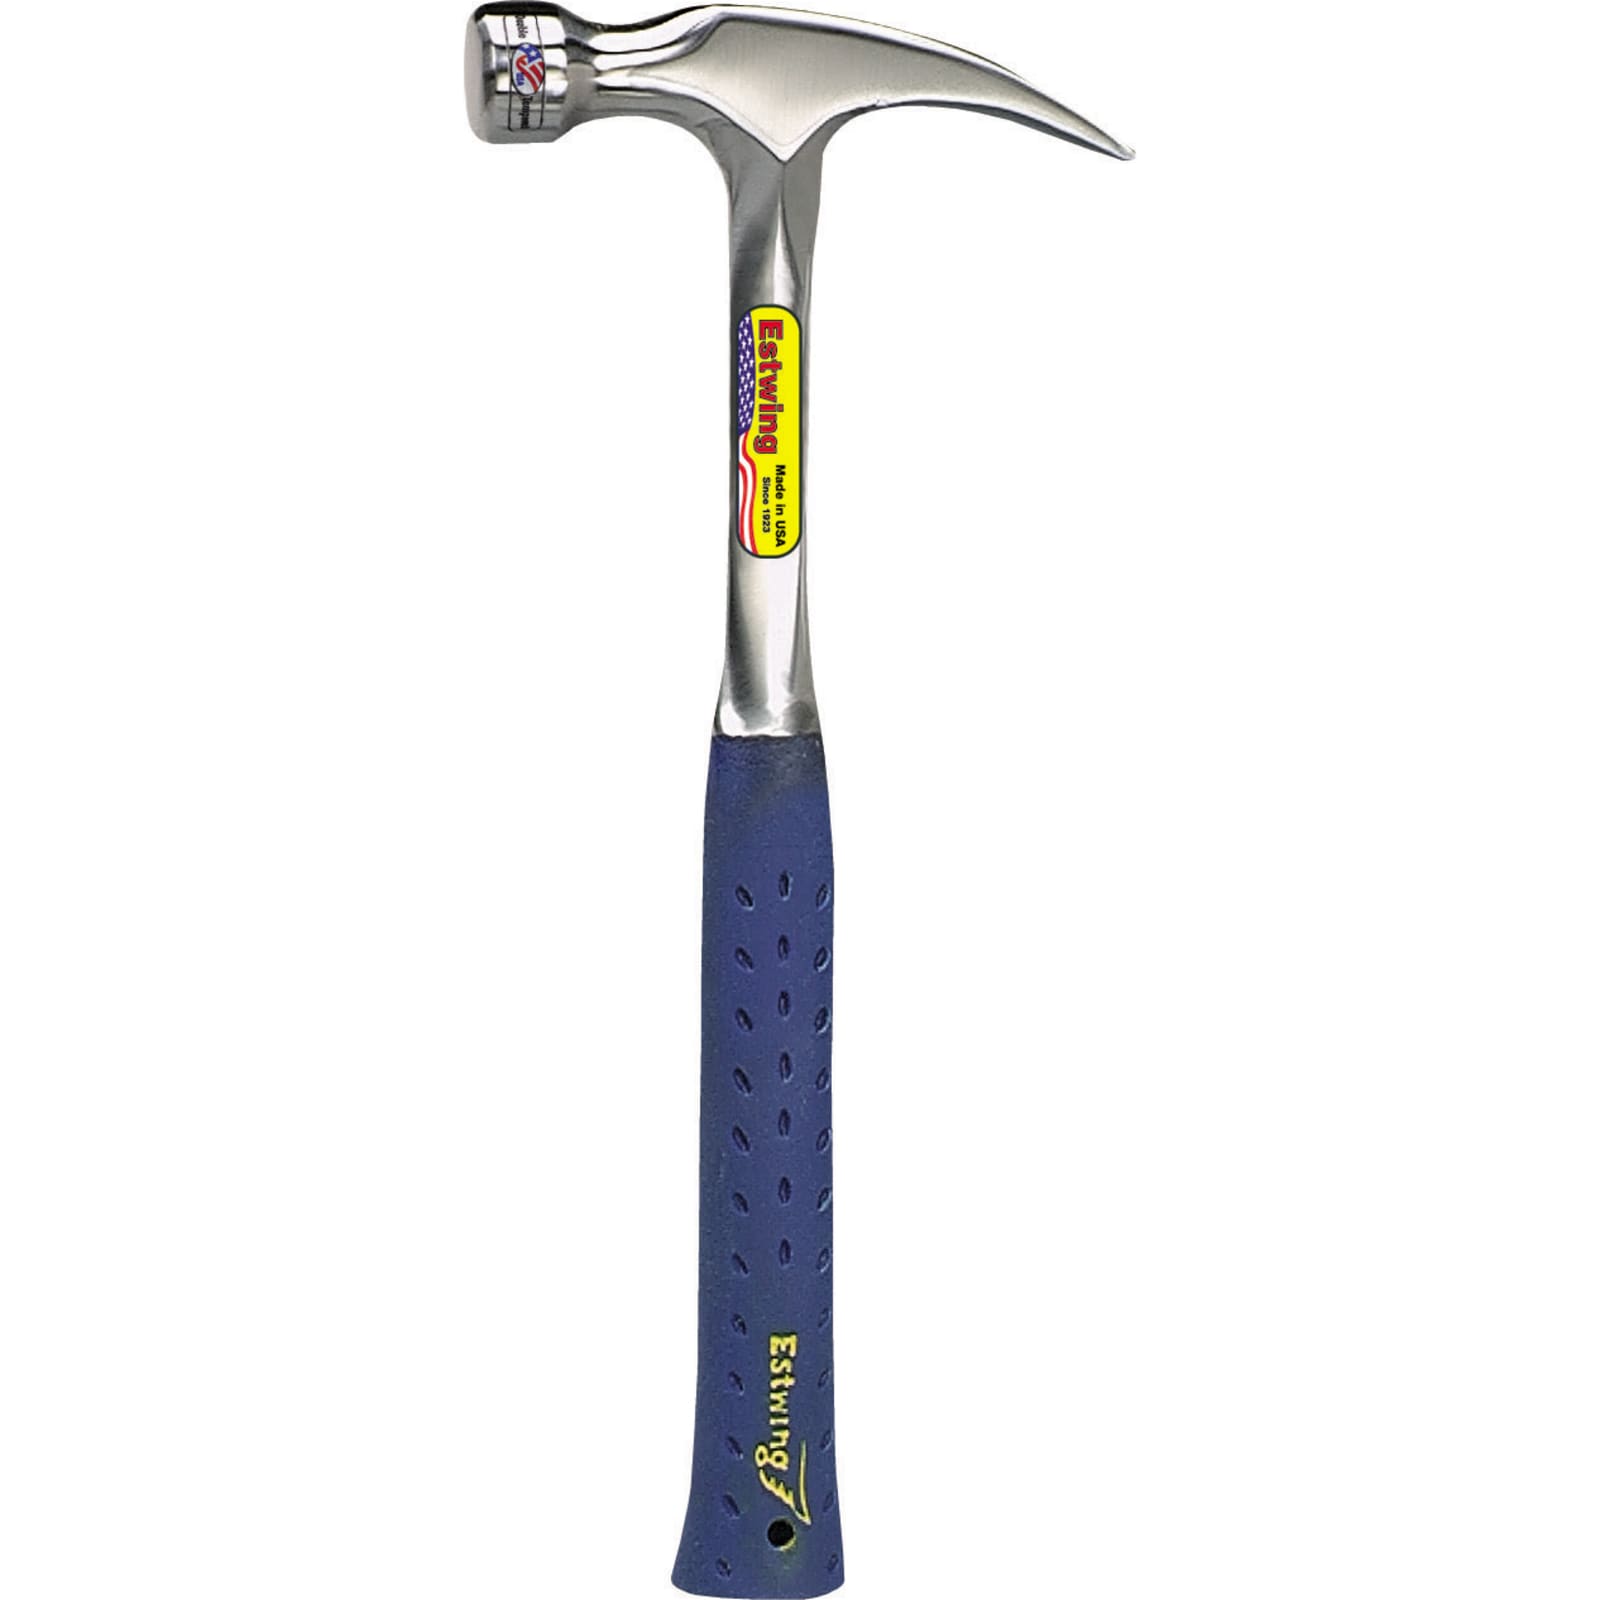 Estwing Hammer - 16 oz Straight Rip Claw with Smooth Face & Shock Reduction  Grip - E3-16S 